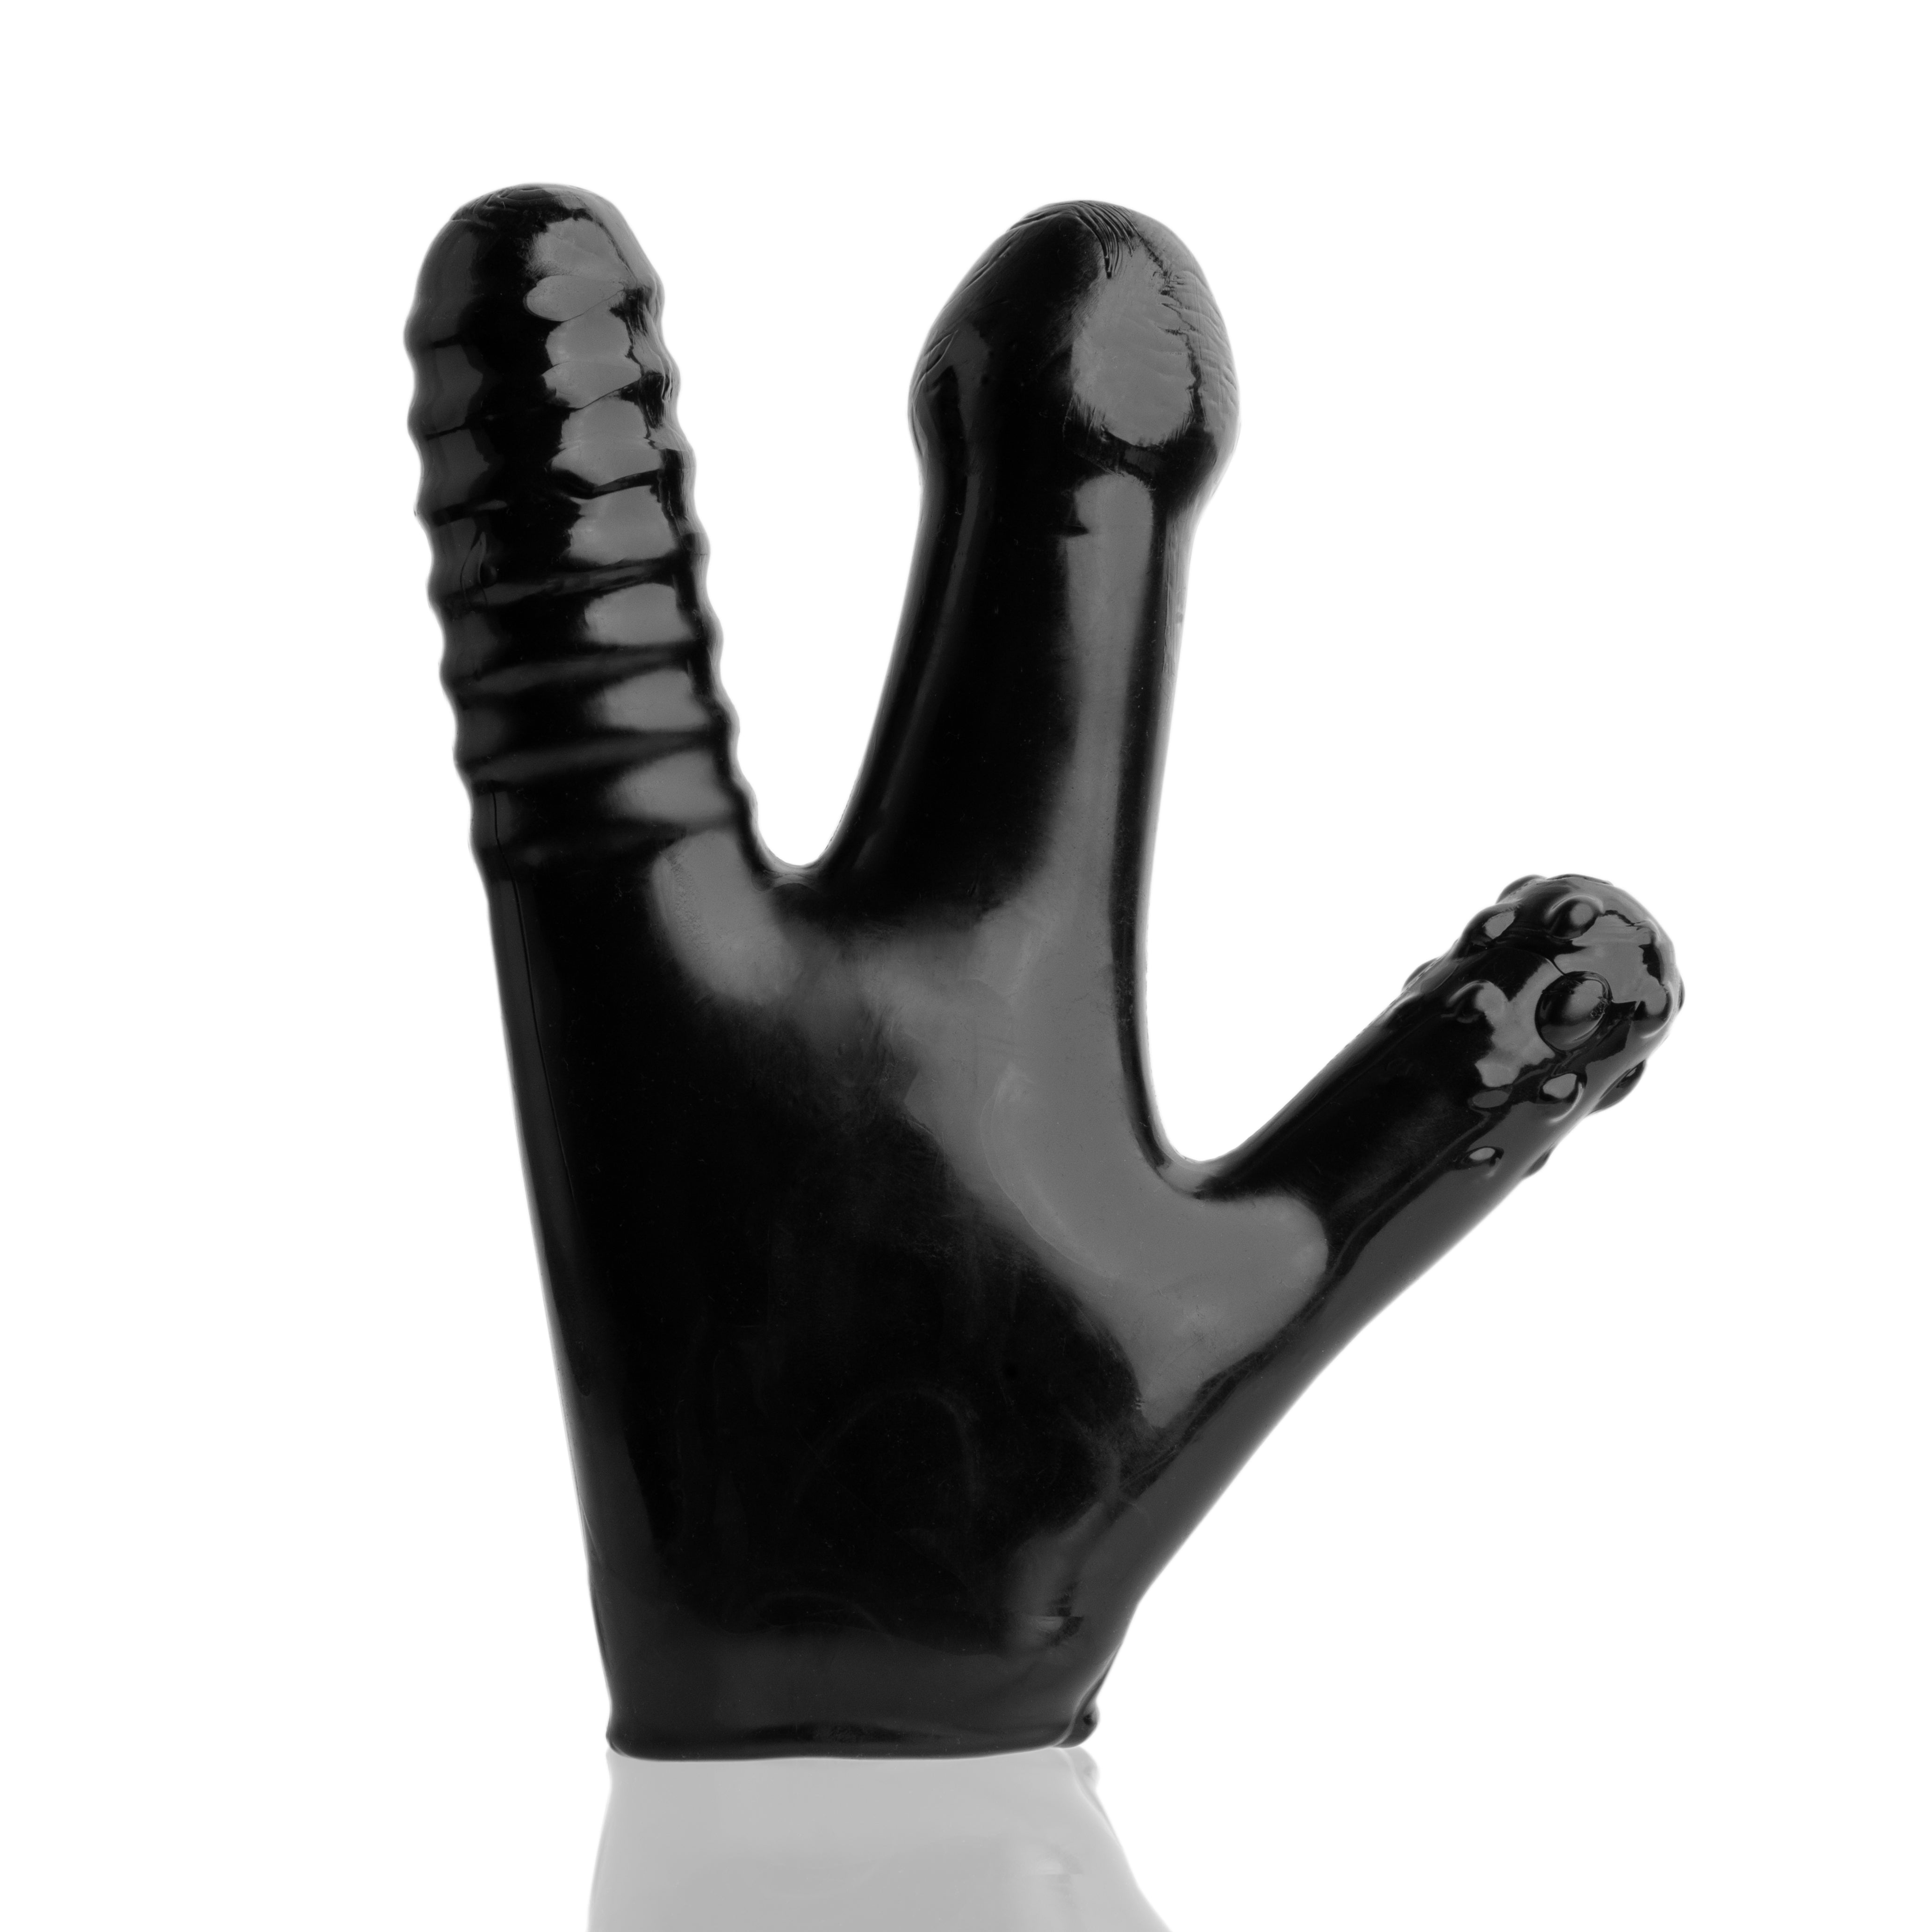 Oxballs Claw Glove • Couples Massager